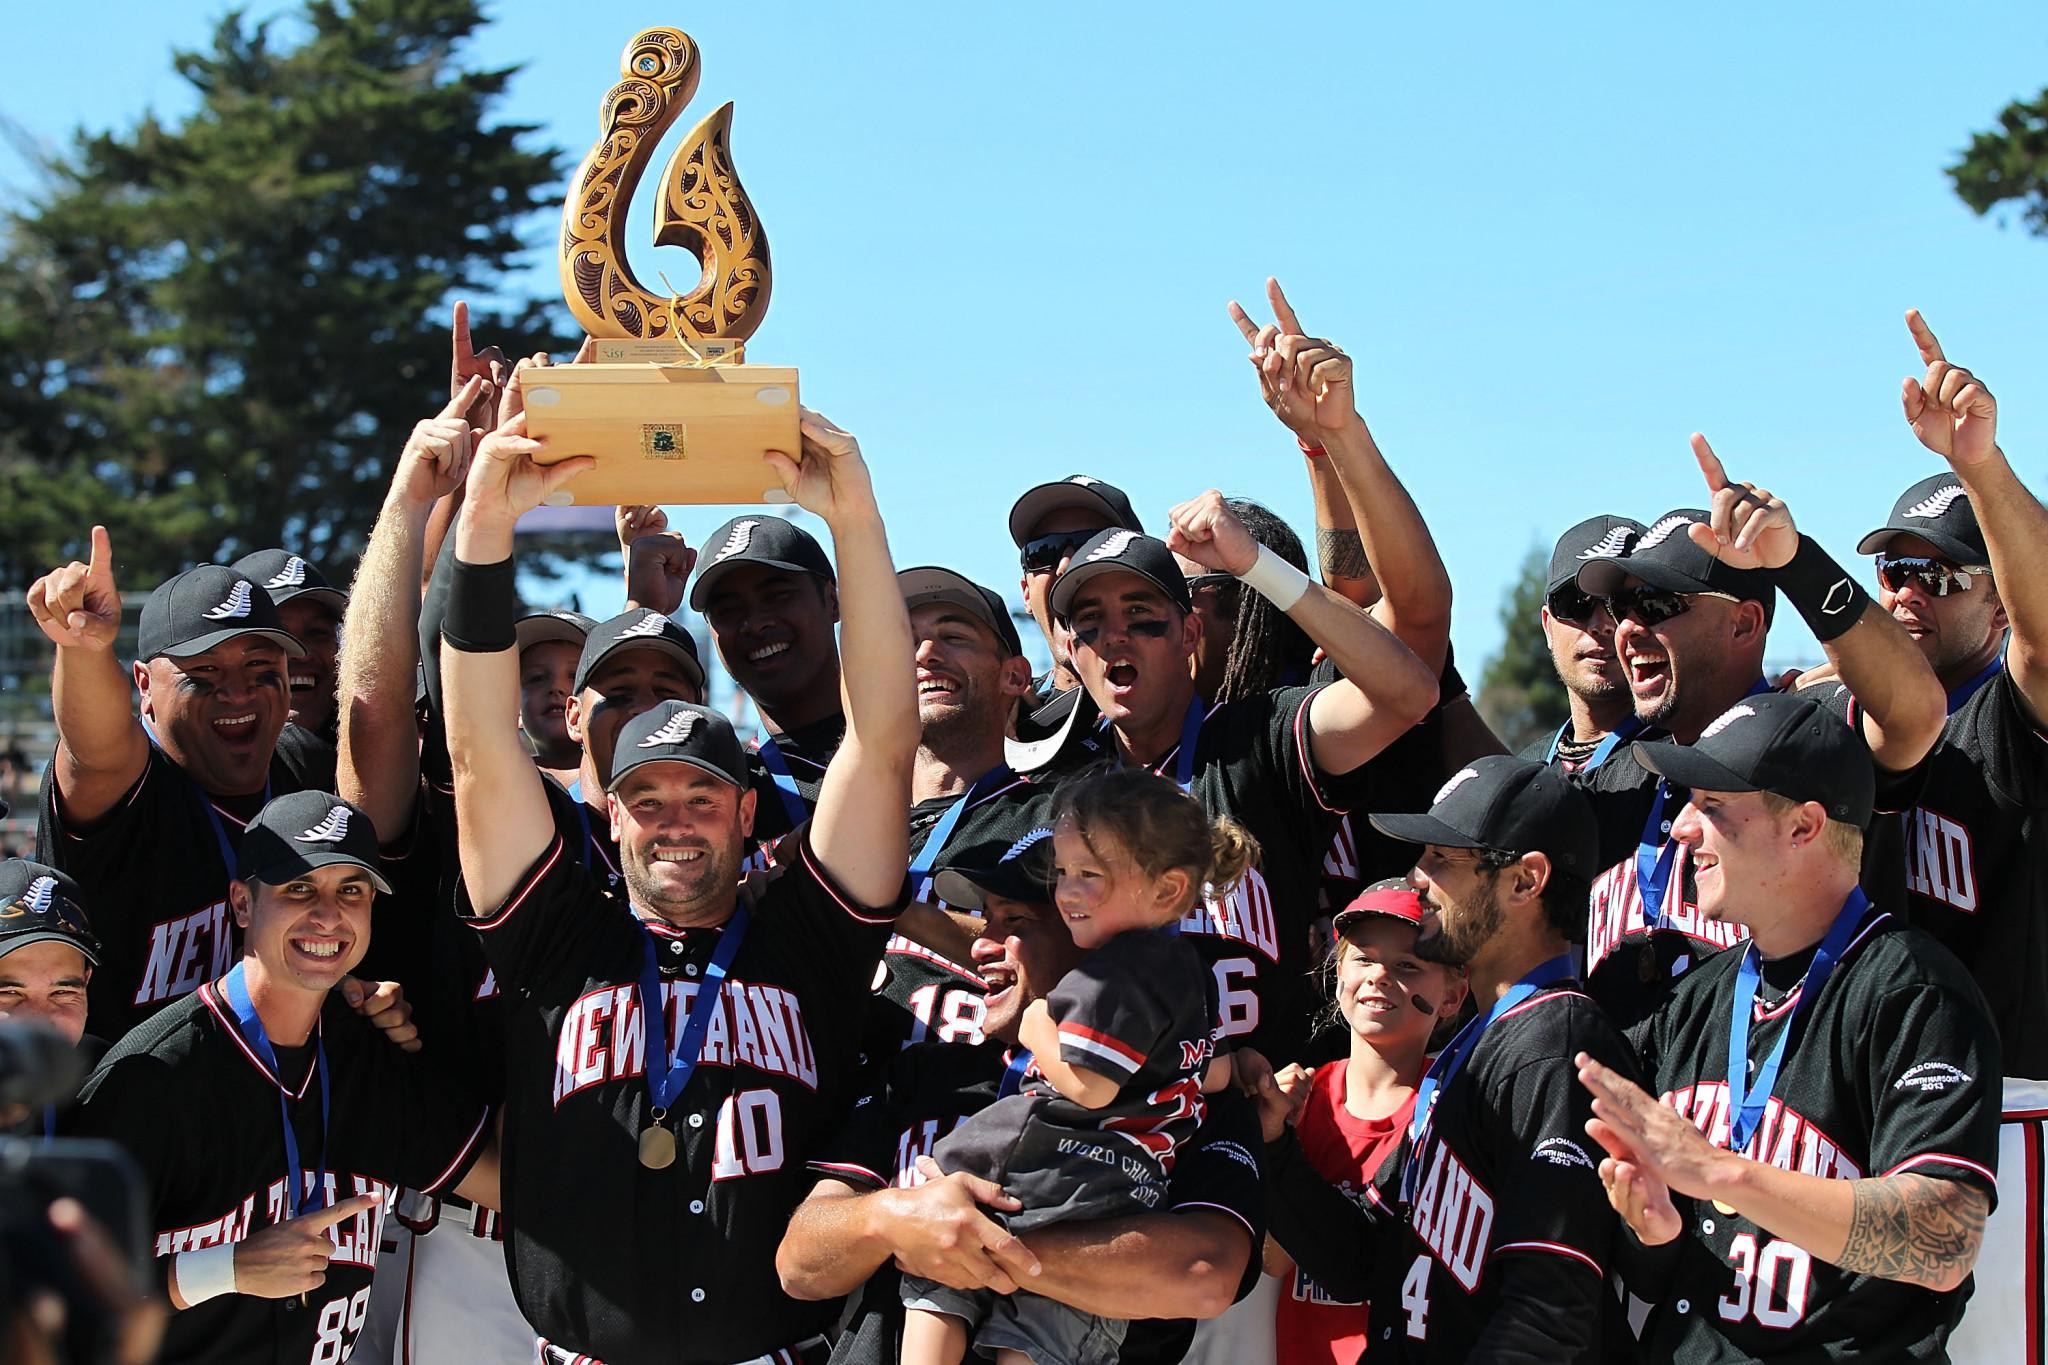 New Zealand are 466 points ahead at the top of the WBSC Men’s Softball rankings ©Getty Images